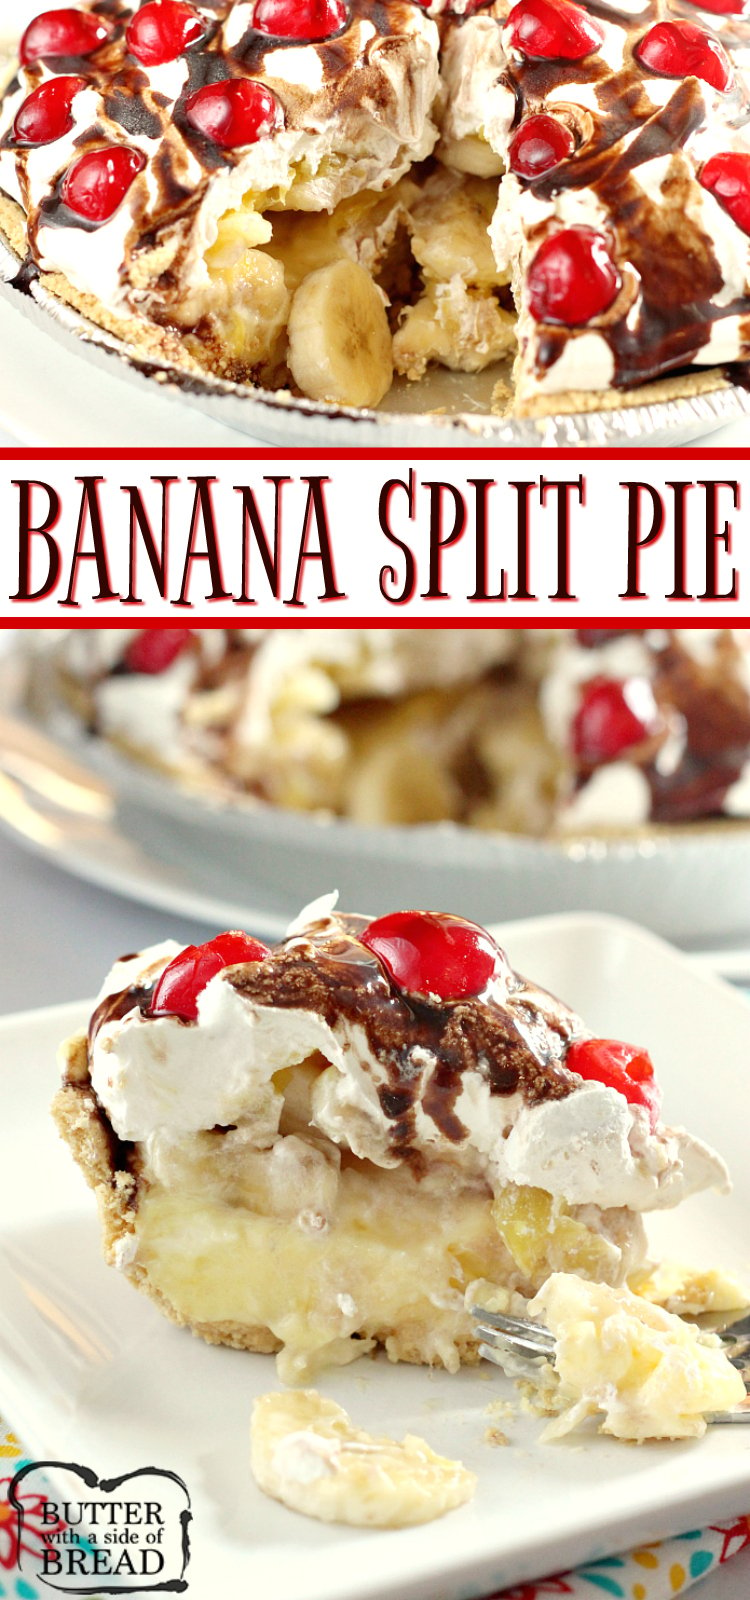 Banana Split Pie is an easy no-bake dessert made with a graham cracker pie crust full of cream cheese, bananas, whipped cream, pineapple, chocolate syrup and cherries. A refreshing banana split dessert that is easy to make and serve!